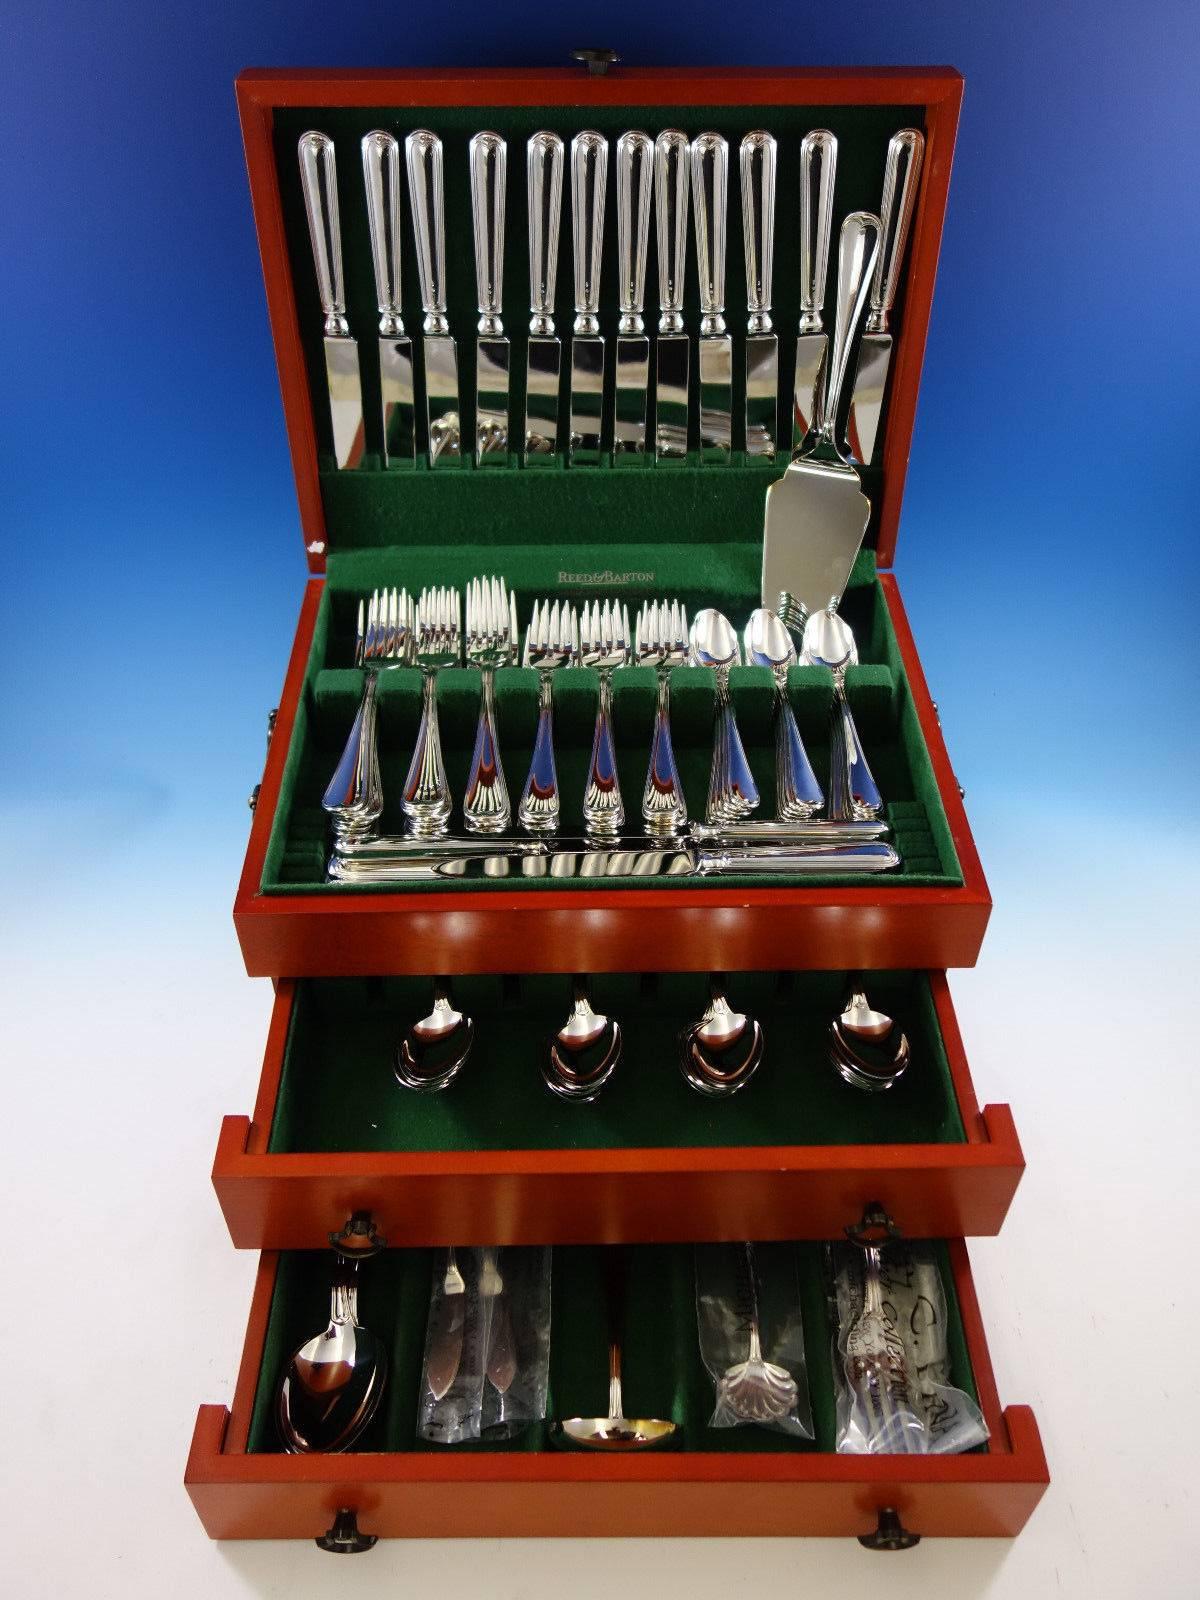 Mauriziano proposes a superbly revisited classic threaded style that makes it suitable for any table setting.

Monumental Dinner Size Maurizano by Schiavon Italy (Retailed by Fina) Italian Sterling Silver Flatware set - 129 pieces. This set